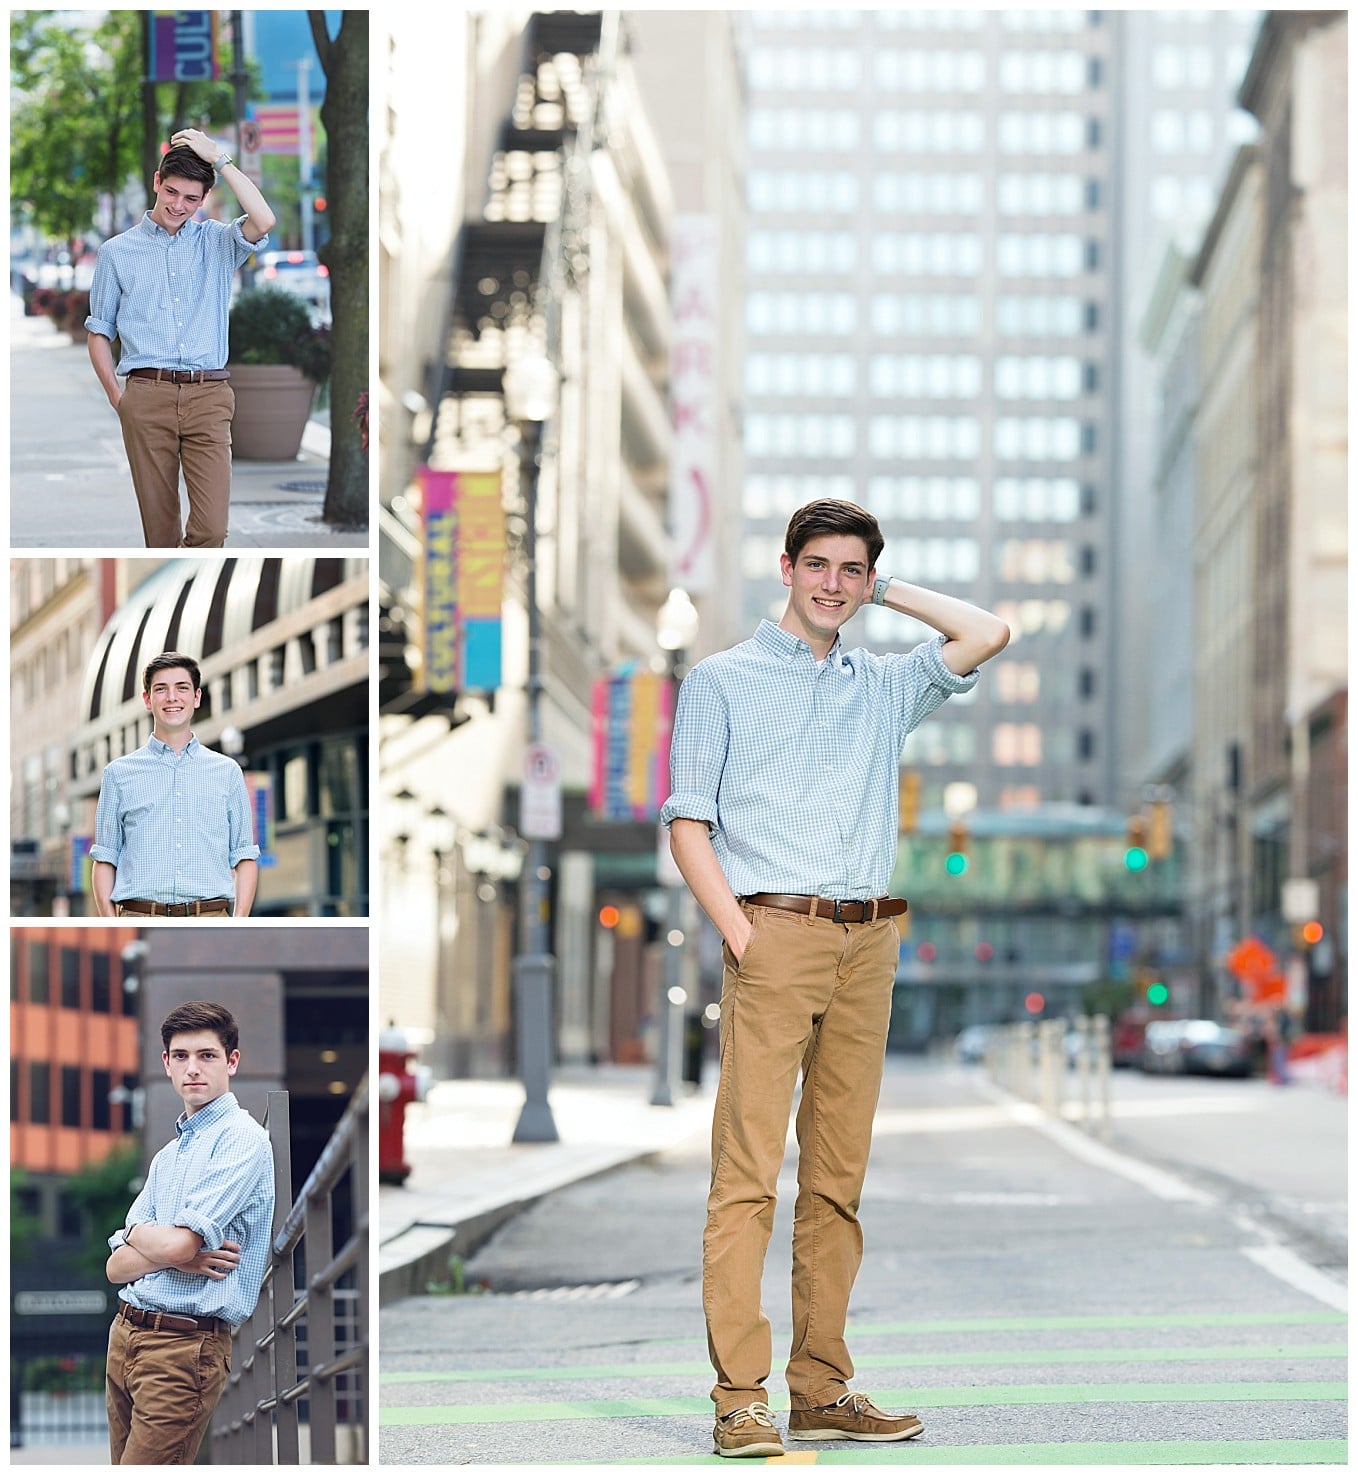 collage of images of a senior guy standing in an empty downtown street with tall buildings in the background